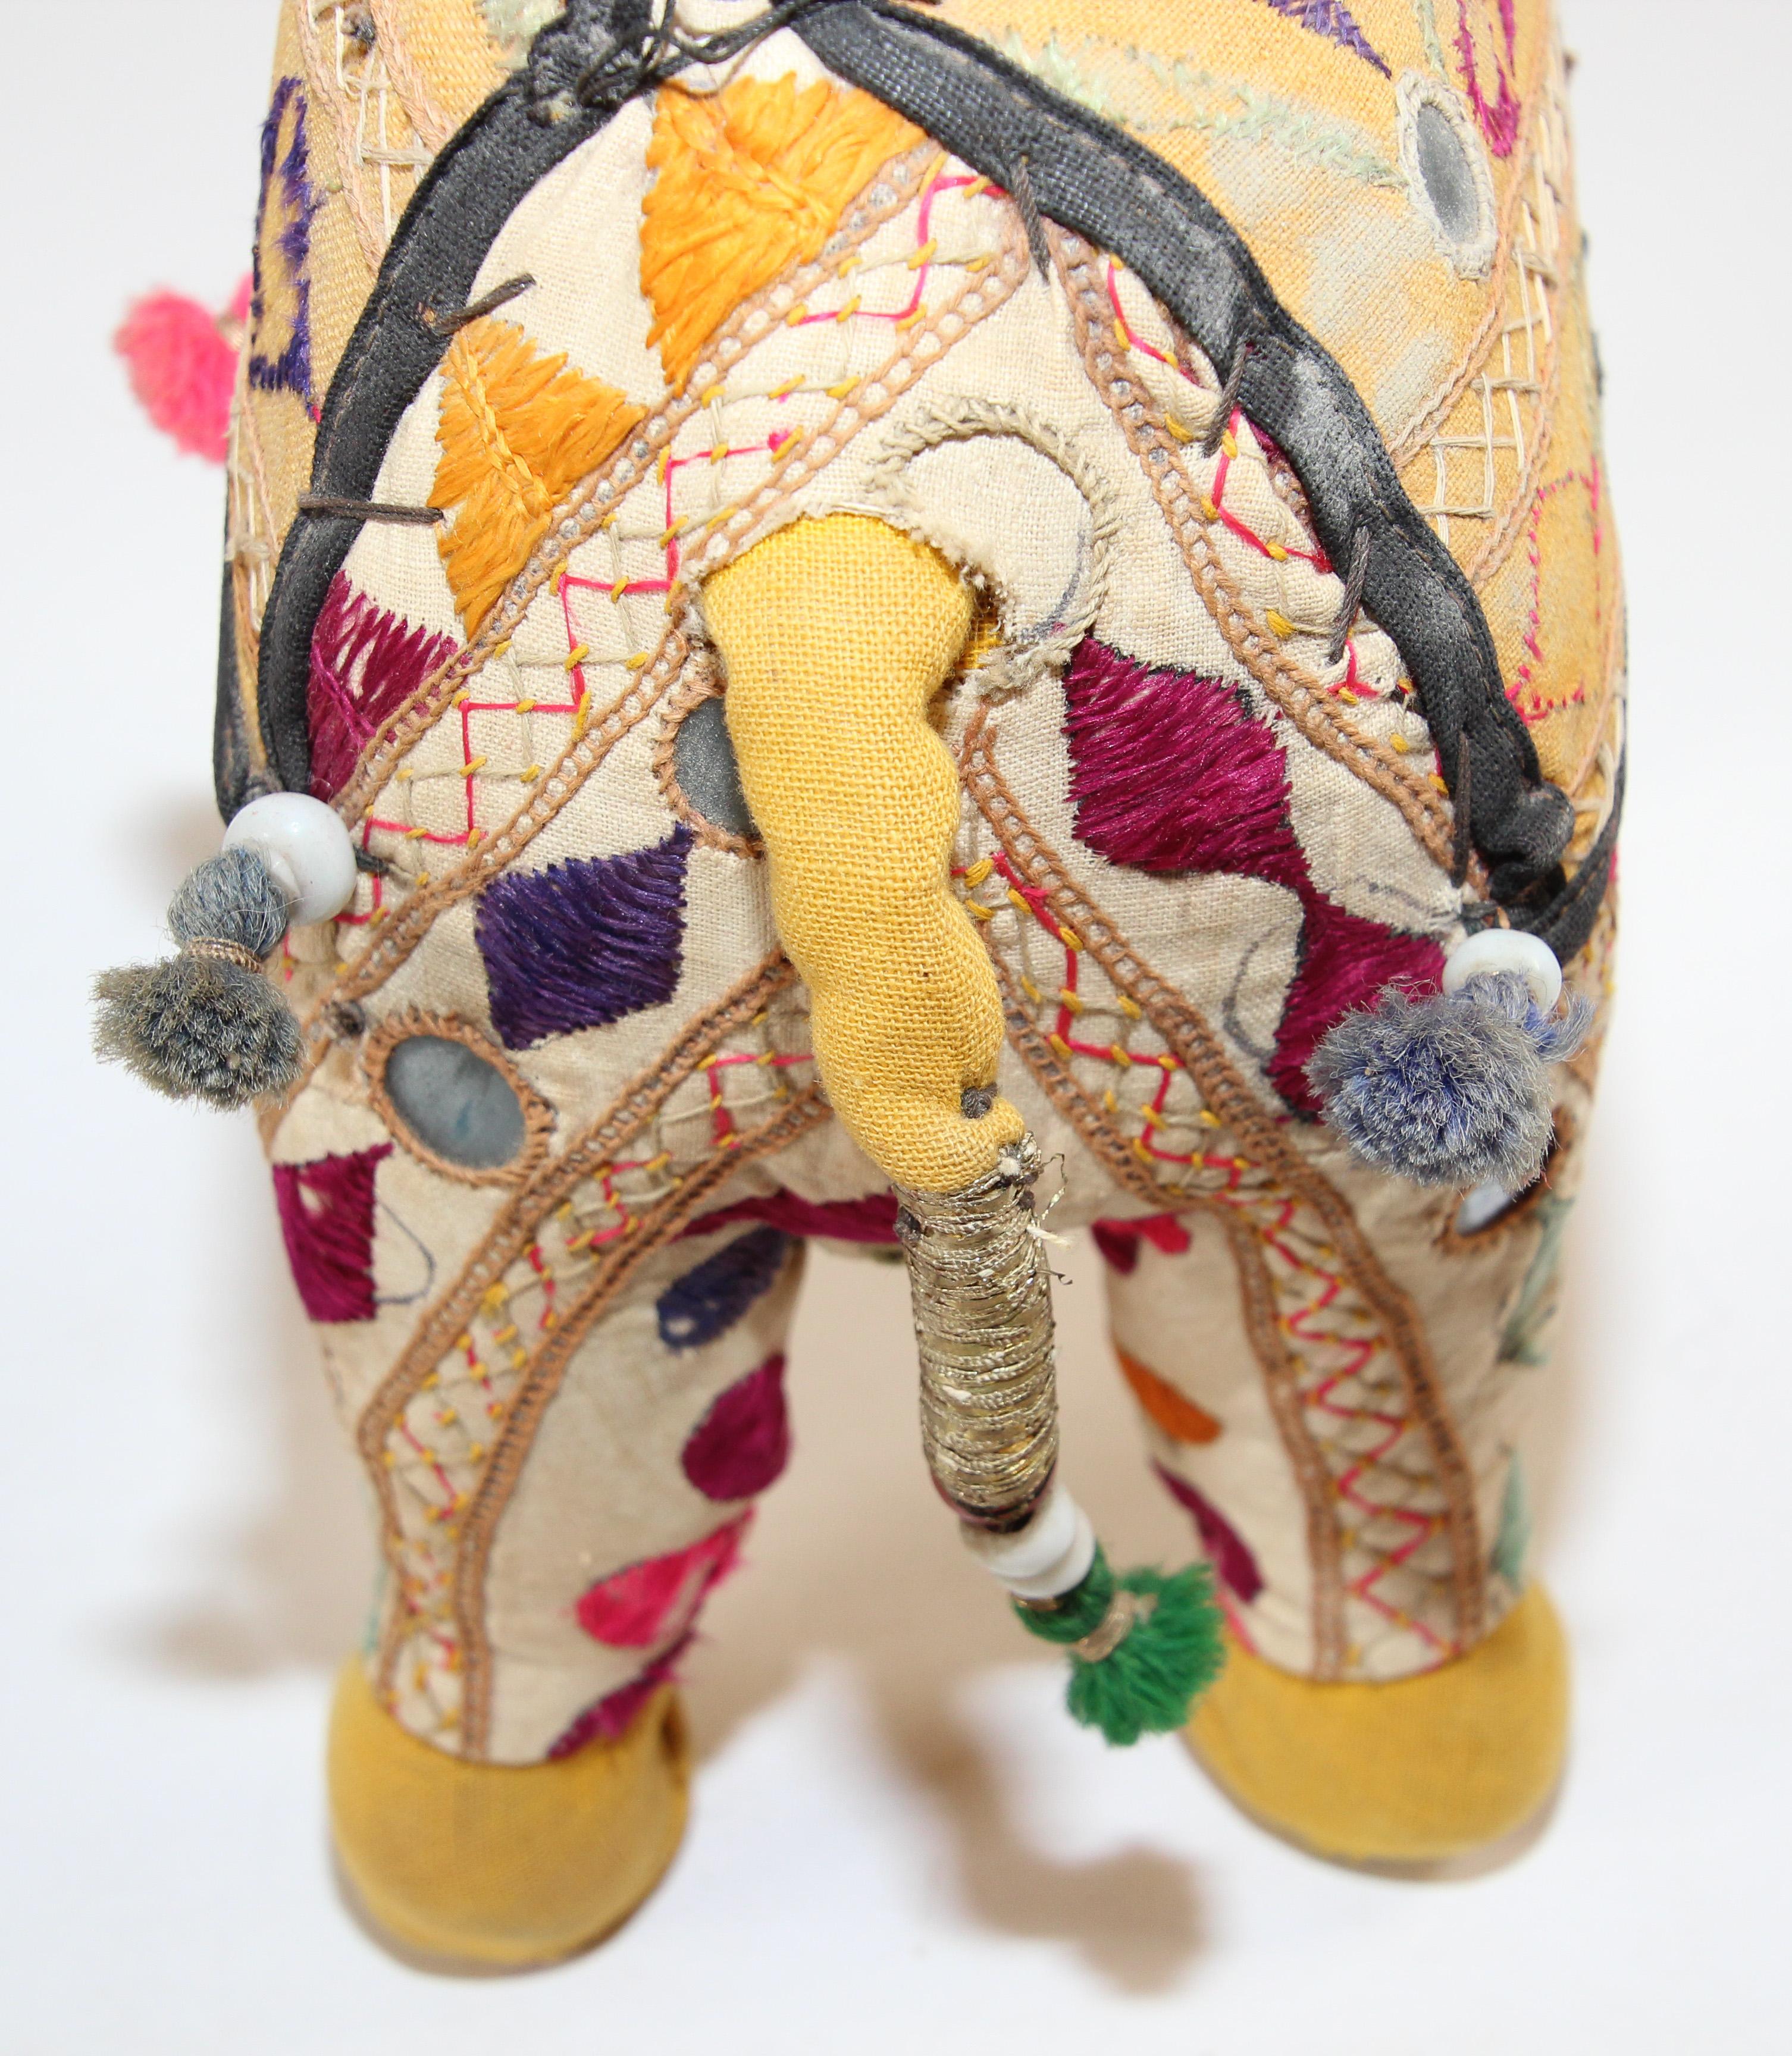 Handcrafted Vintage Stuffed Raj Cotton Embroidered Camel Toy, India, 1950 For Sale 5